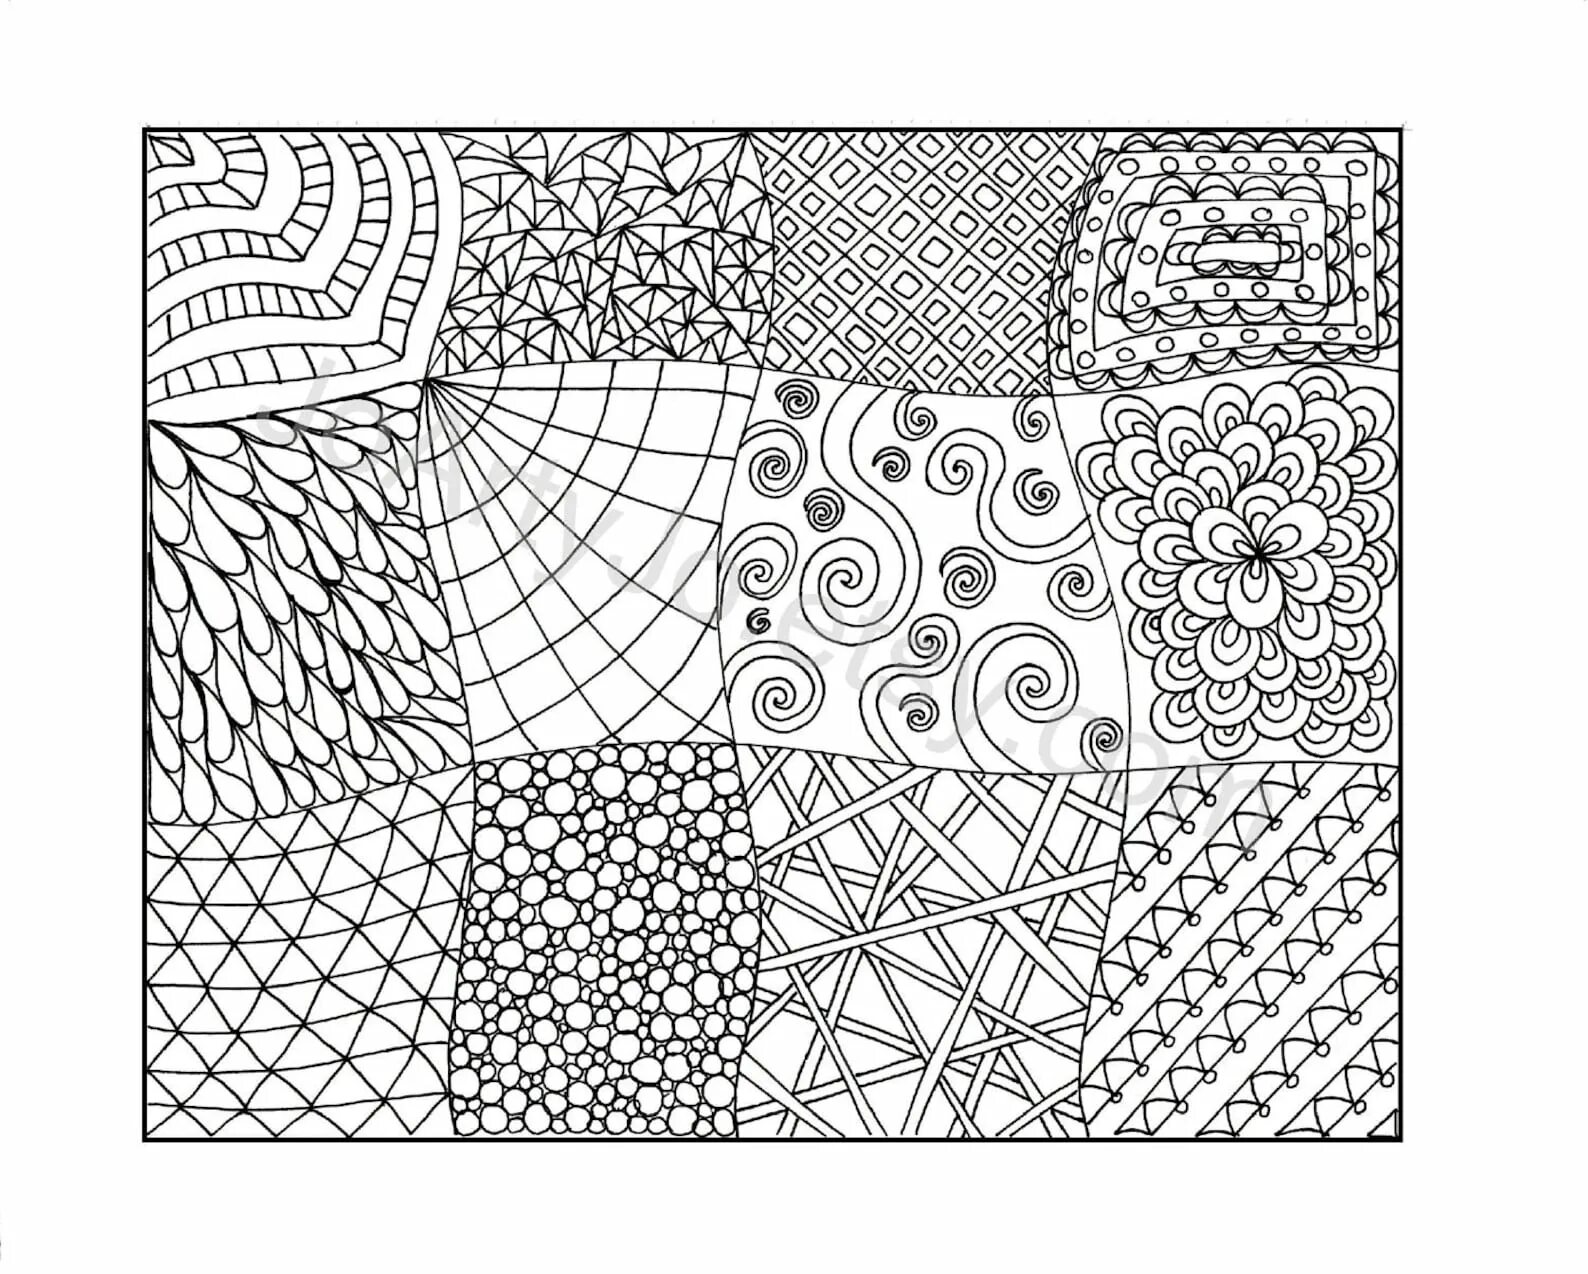 Amazing anti-stress coloring book for markers